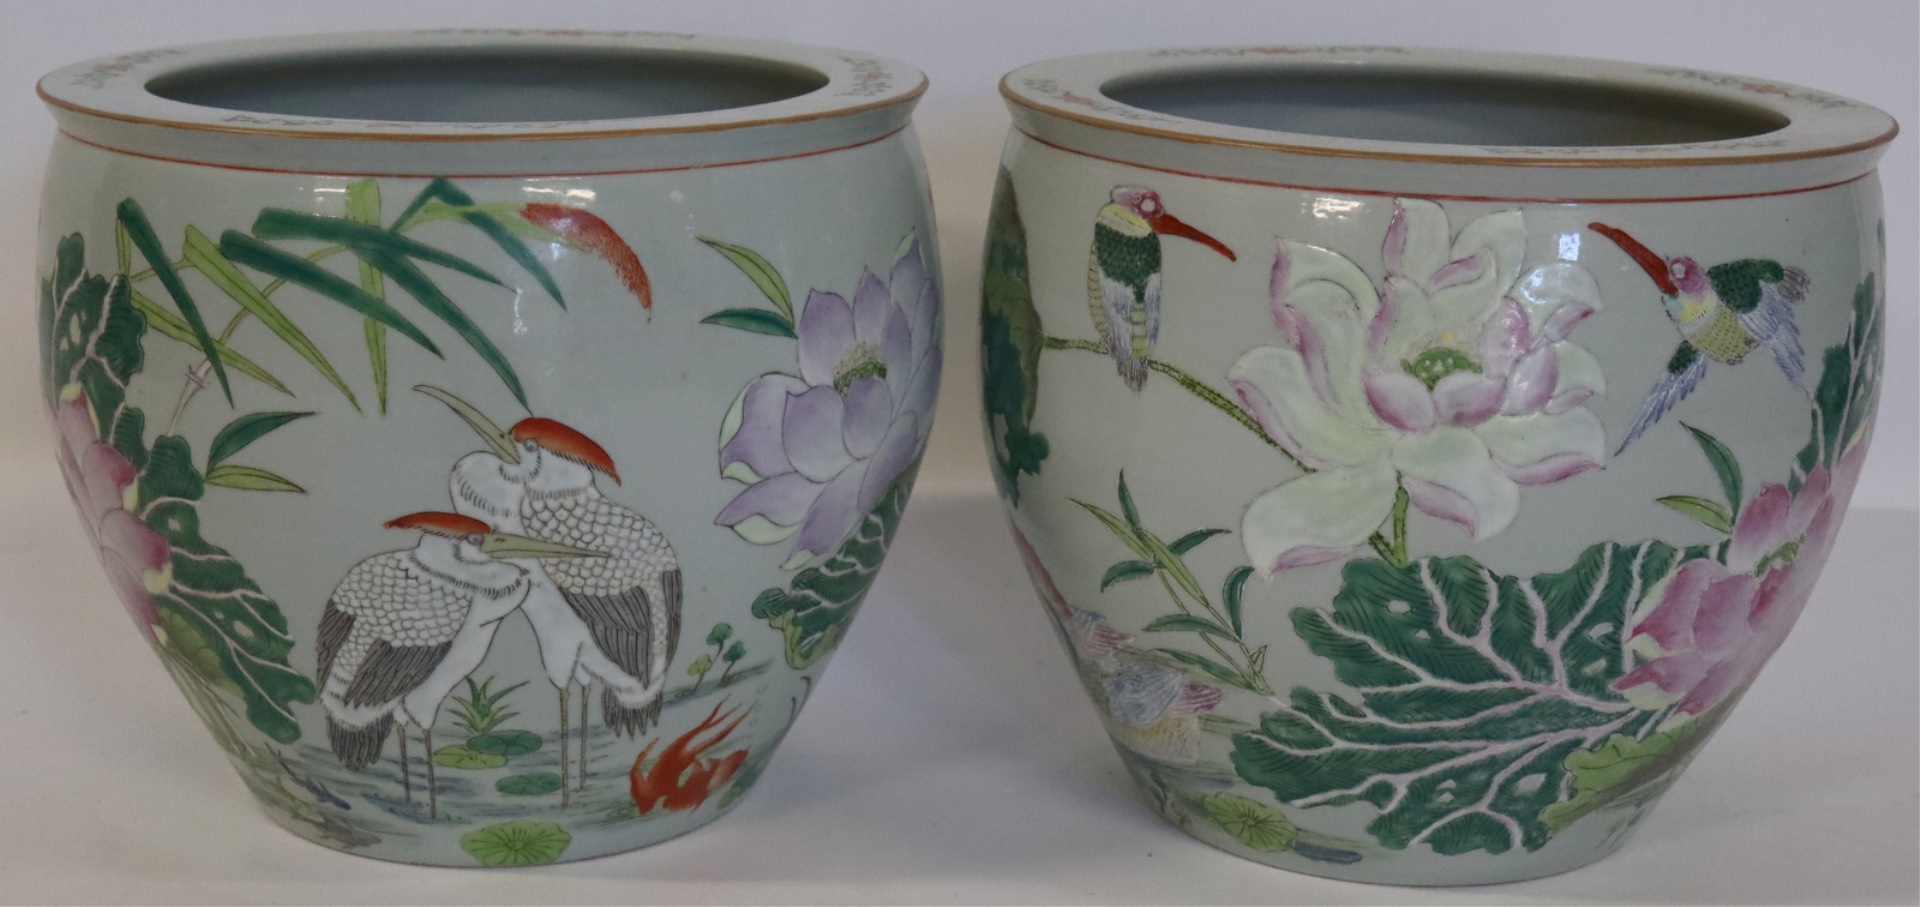 PAIR OF CHINESE ENAMEL DECORATED 3bd74d